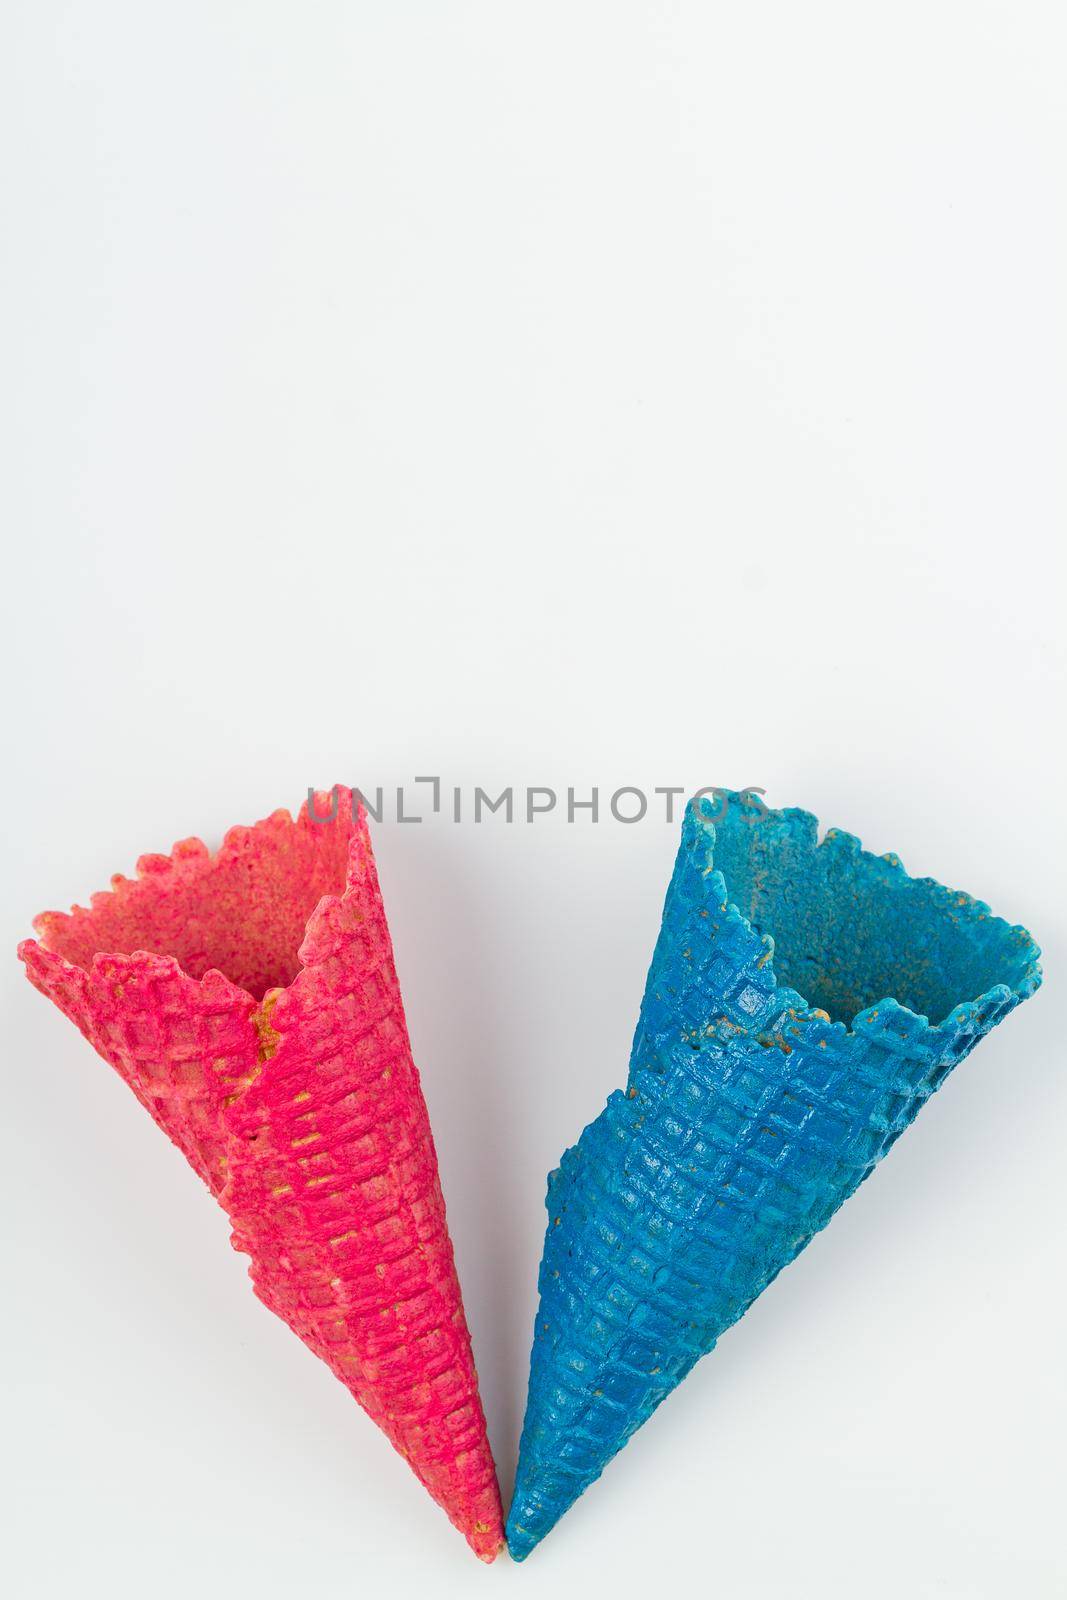 Pink and blue ice cream waffle cones on white background. Concept of difference between men and women.